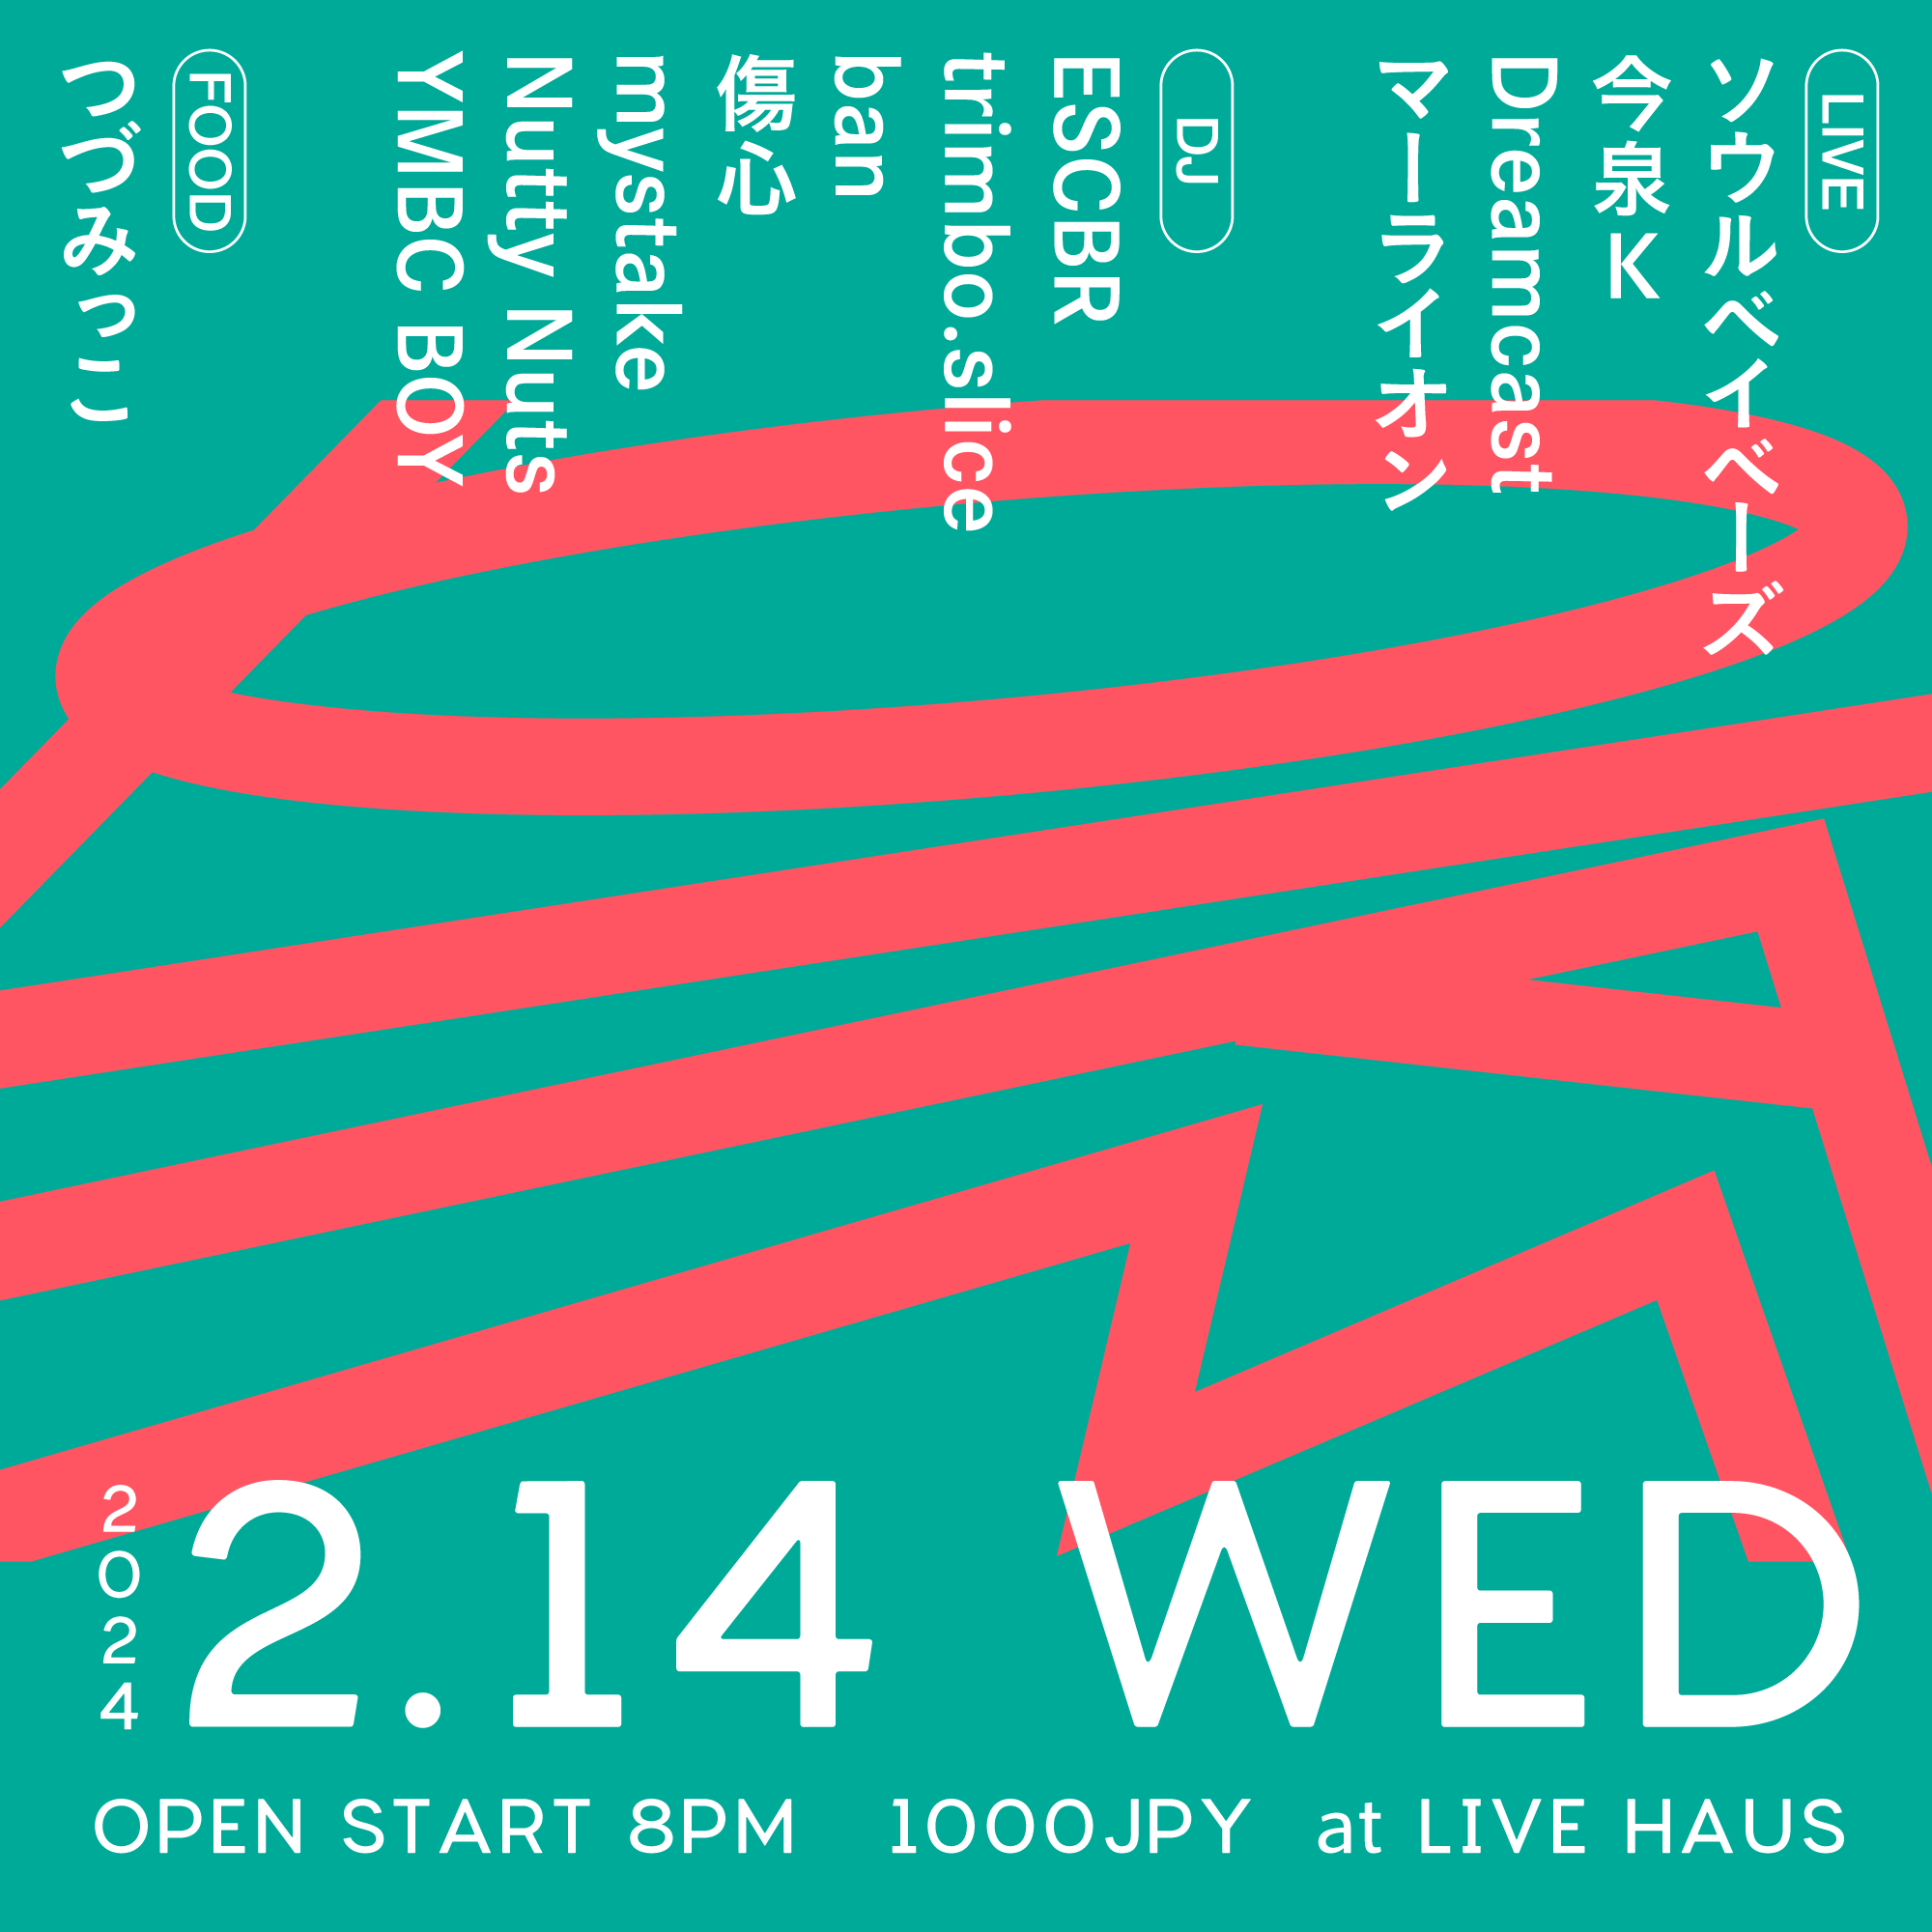 2/14(wed)p/am at LIVE HAUS ¥1,000(ND) OPEN START 20:00 FOOD つづみっこ LIVE ソウルベイベーズ 今泉K Dreamcast マーライオン DJ ESCBR trimbo.slice ban 傷心 mystake Nutty Nuts YMBC BOY